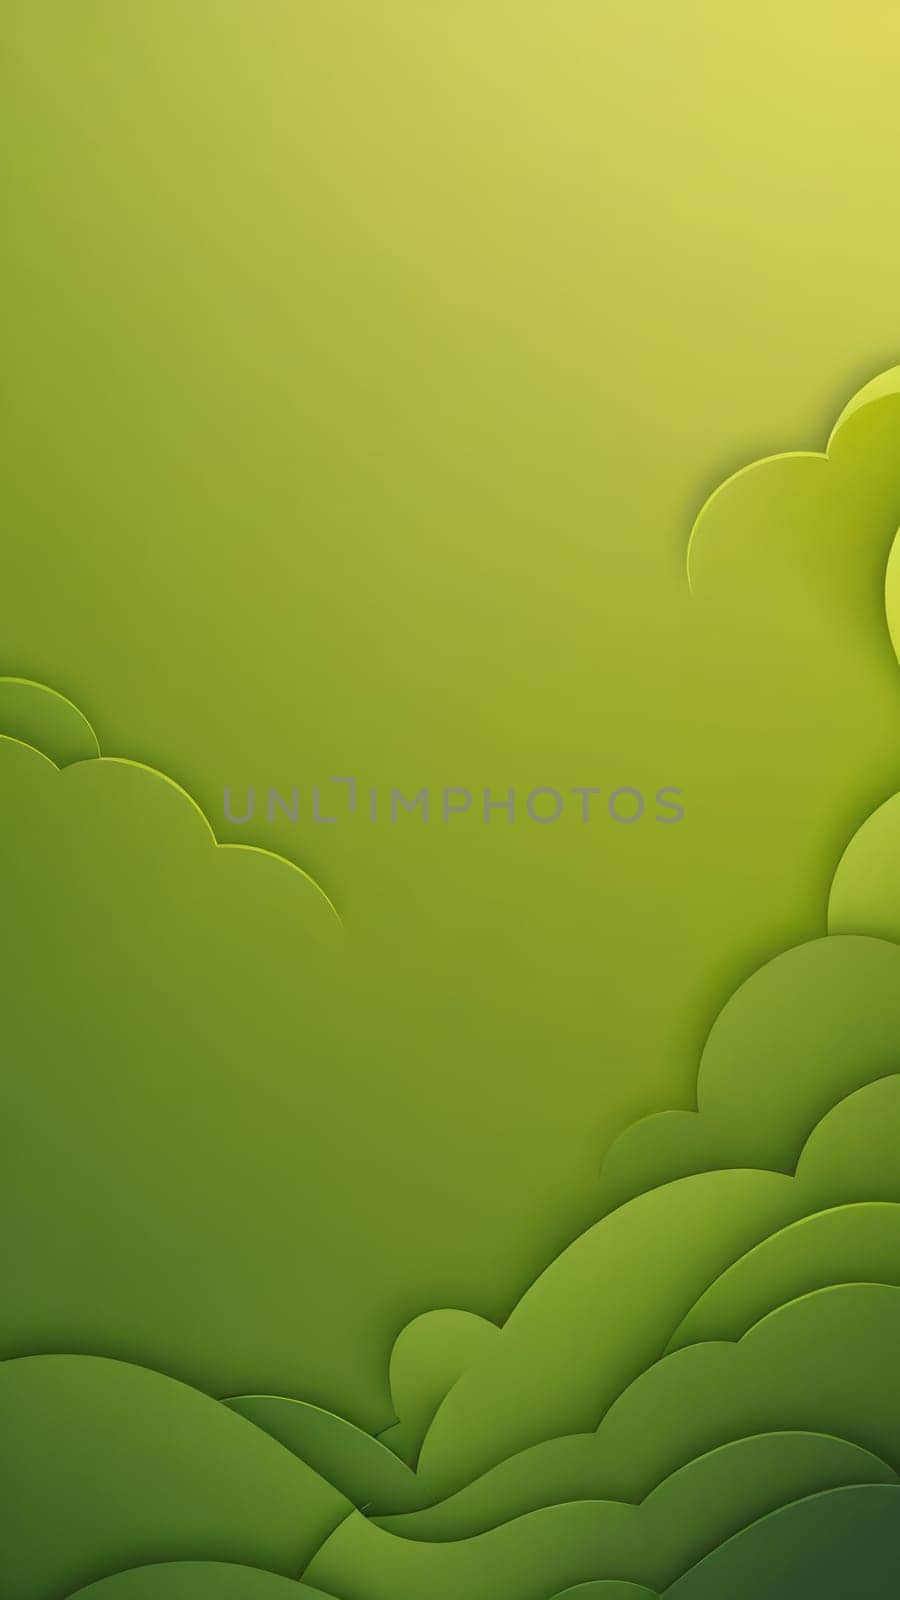 Screen background from Scalloped shapes and olive by nkotlyar